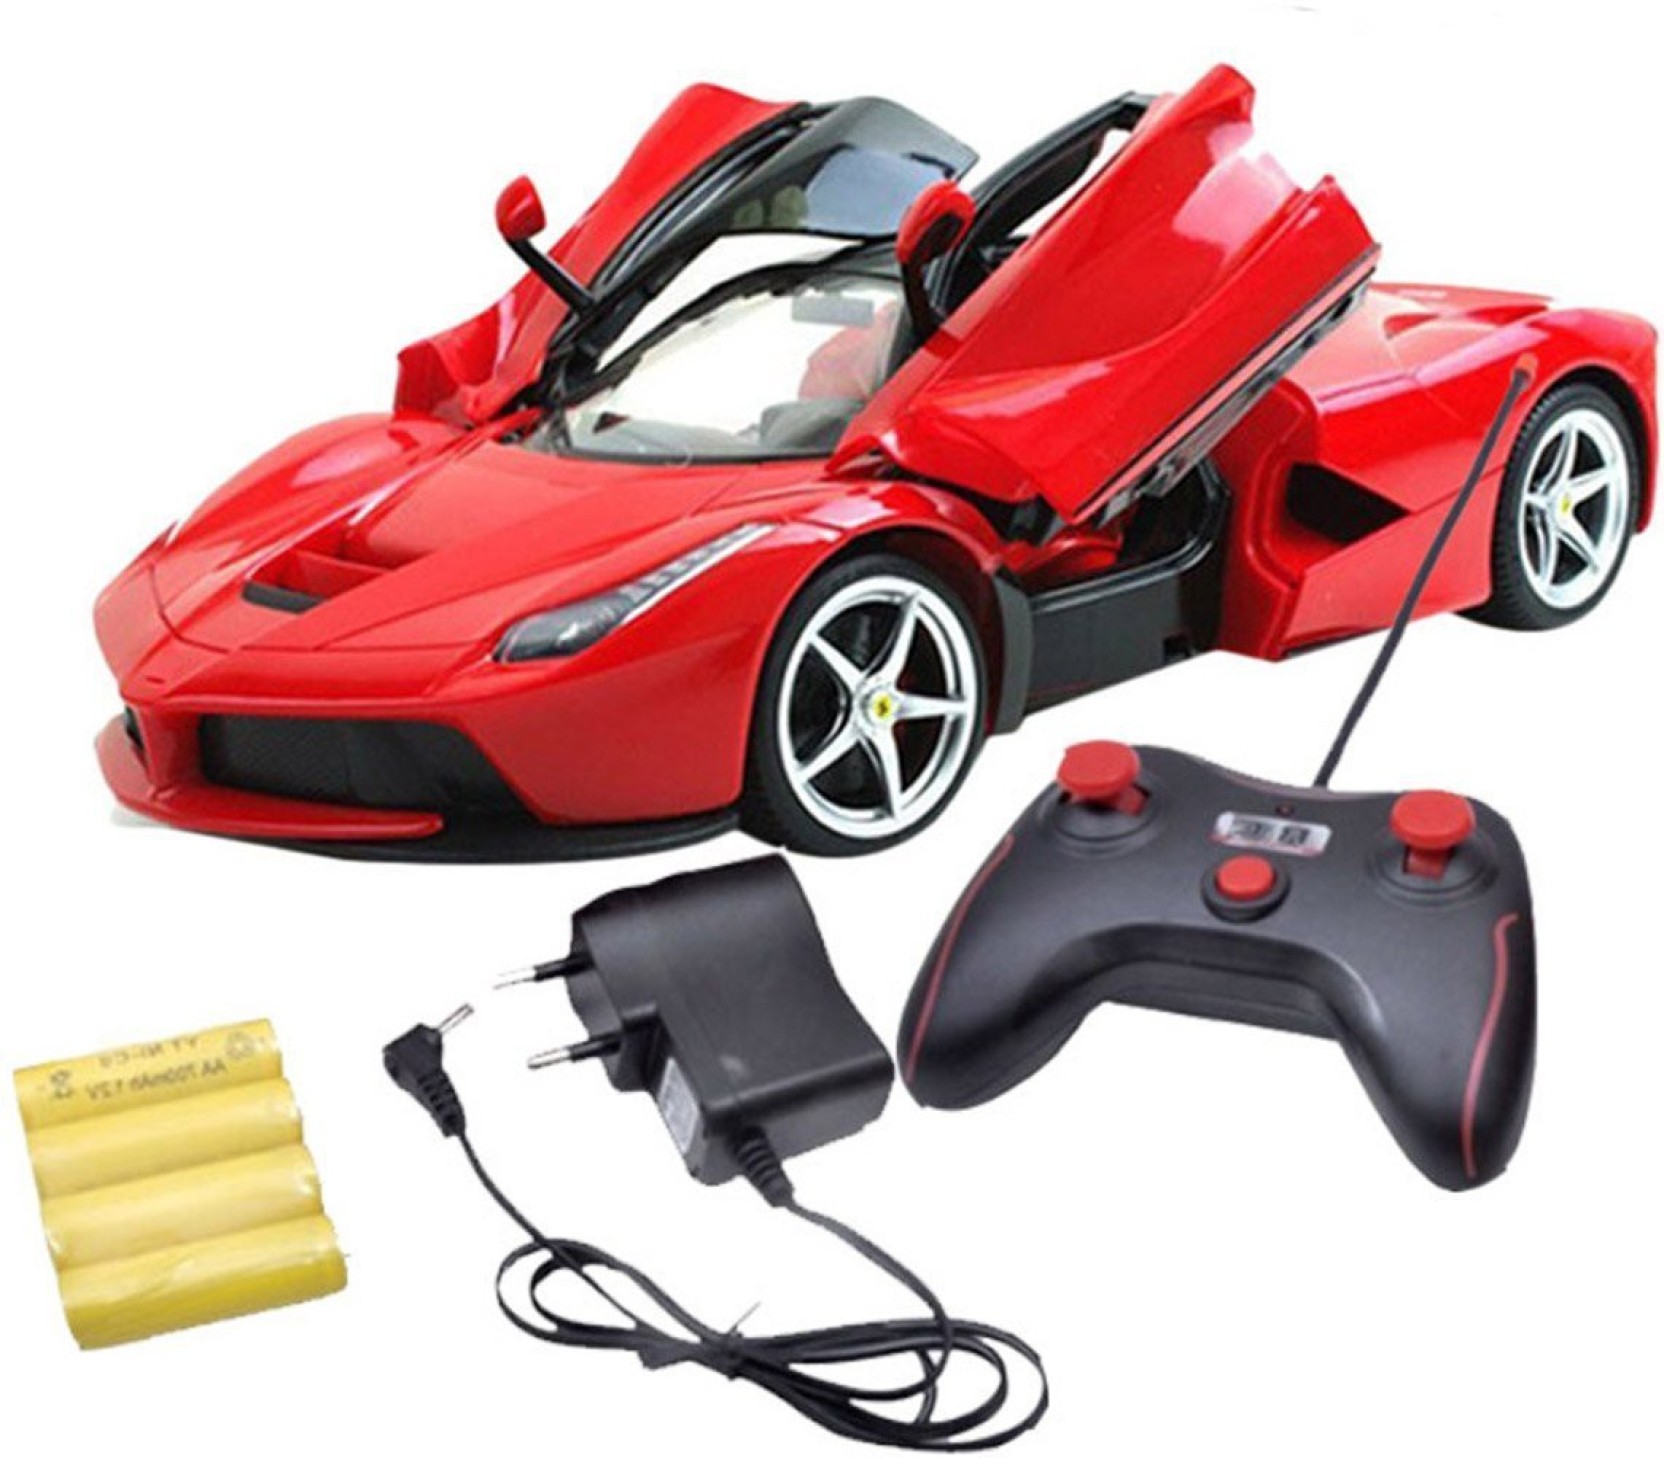 Amayra Toy Car like Ferrari With open And Closed Doors With Remote ...